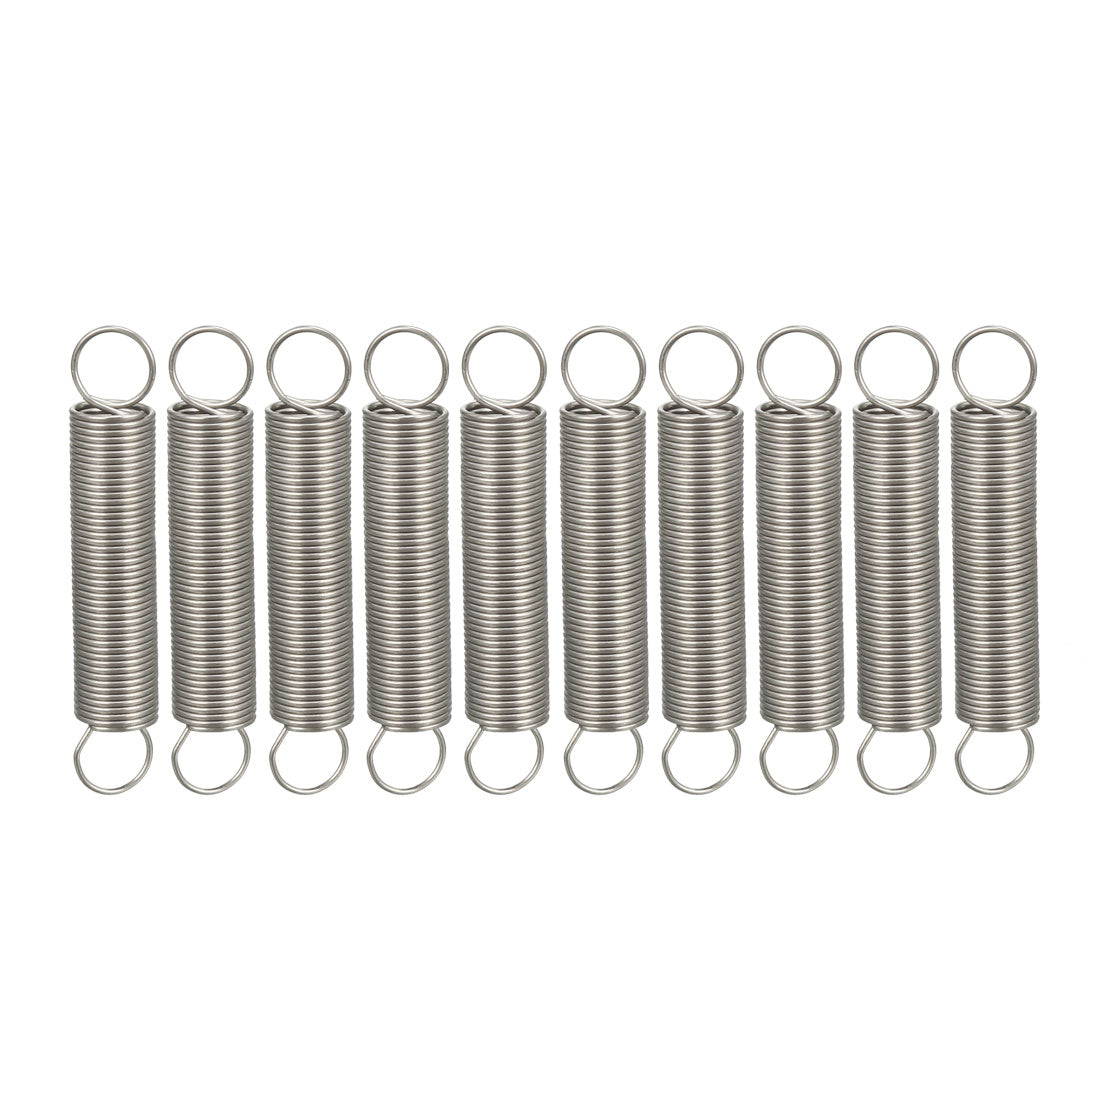 uxcell Uxcell Extended Tension Spring Wire Diameter 0.02", OD 0.24", Free Length 1.38" 10pcs